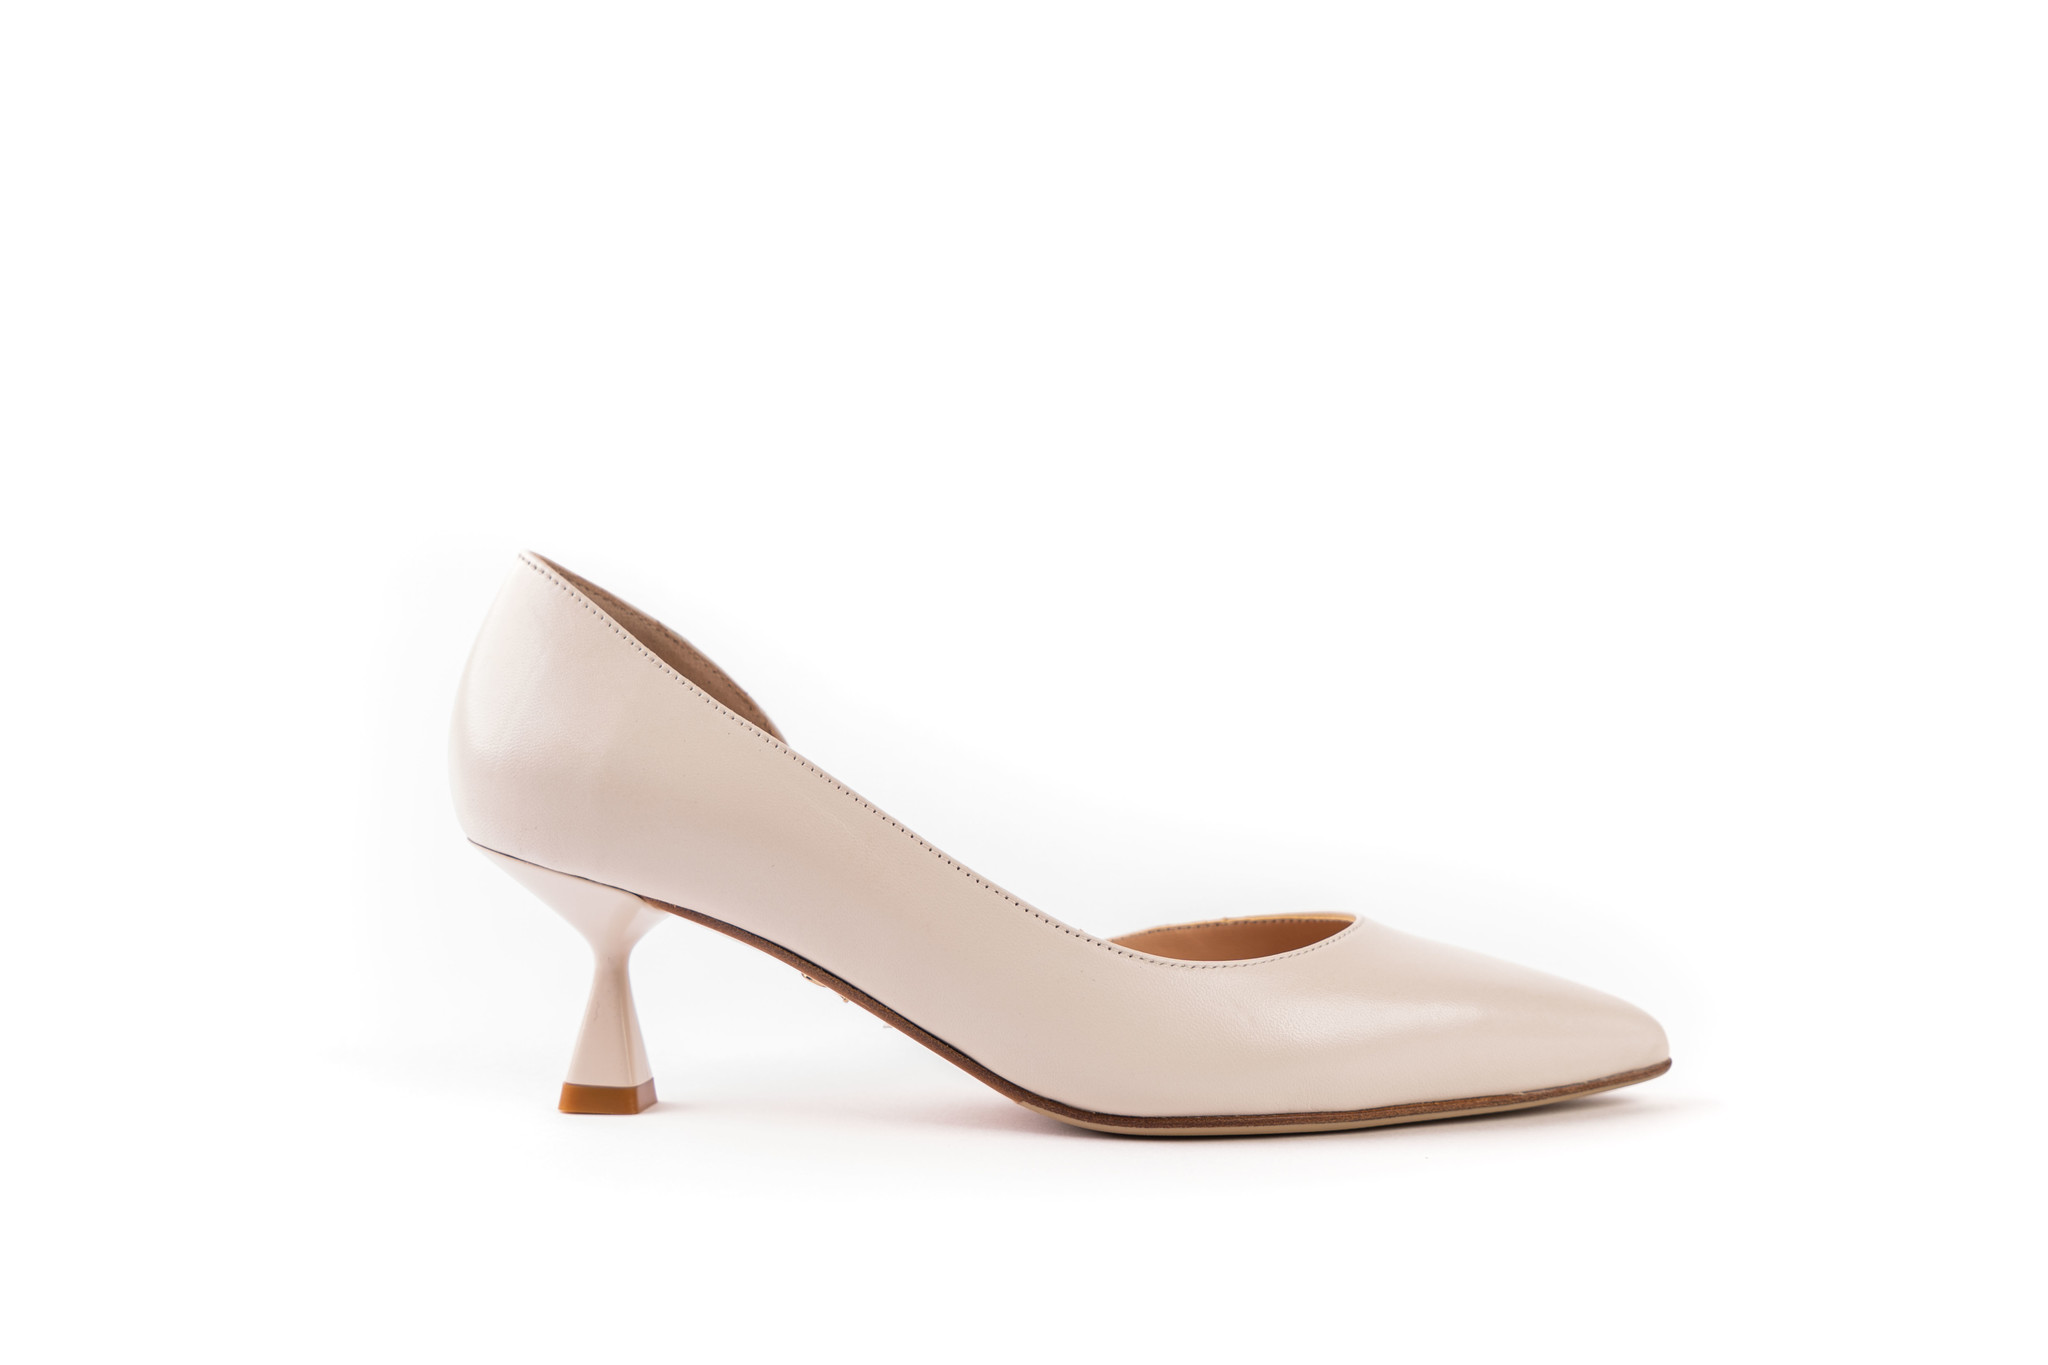 The most comfortable wedding shoes or all-round party shoes! - Cara Rosa